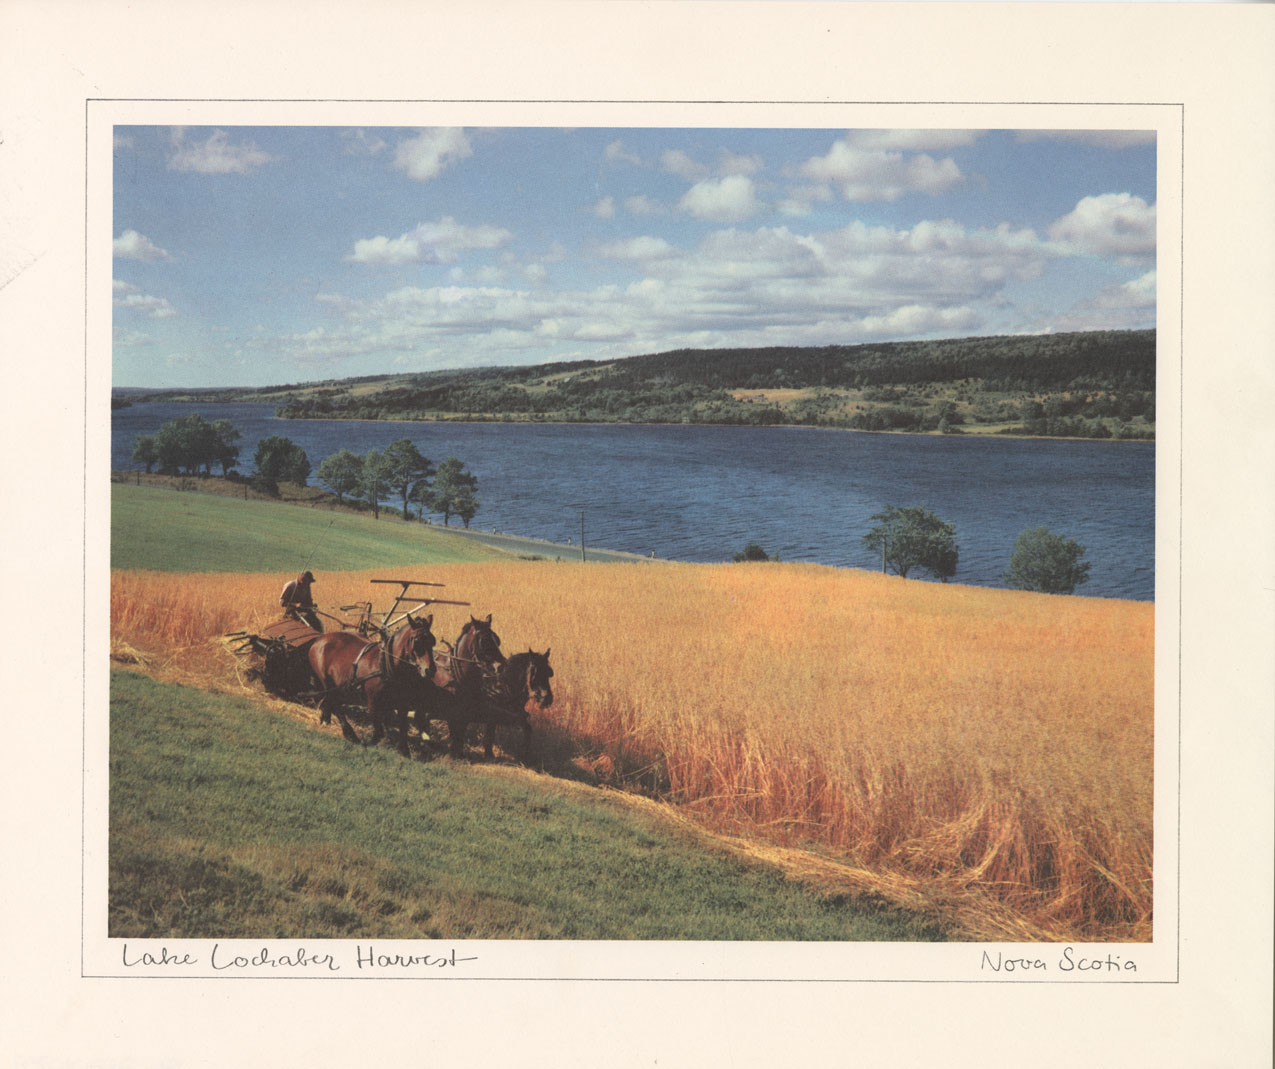 Book Jackets, Advertisements, and Art Reproductions: Atlantic Pavillion Photos of NS (from expo '67): Lake Lochaber Harvest